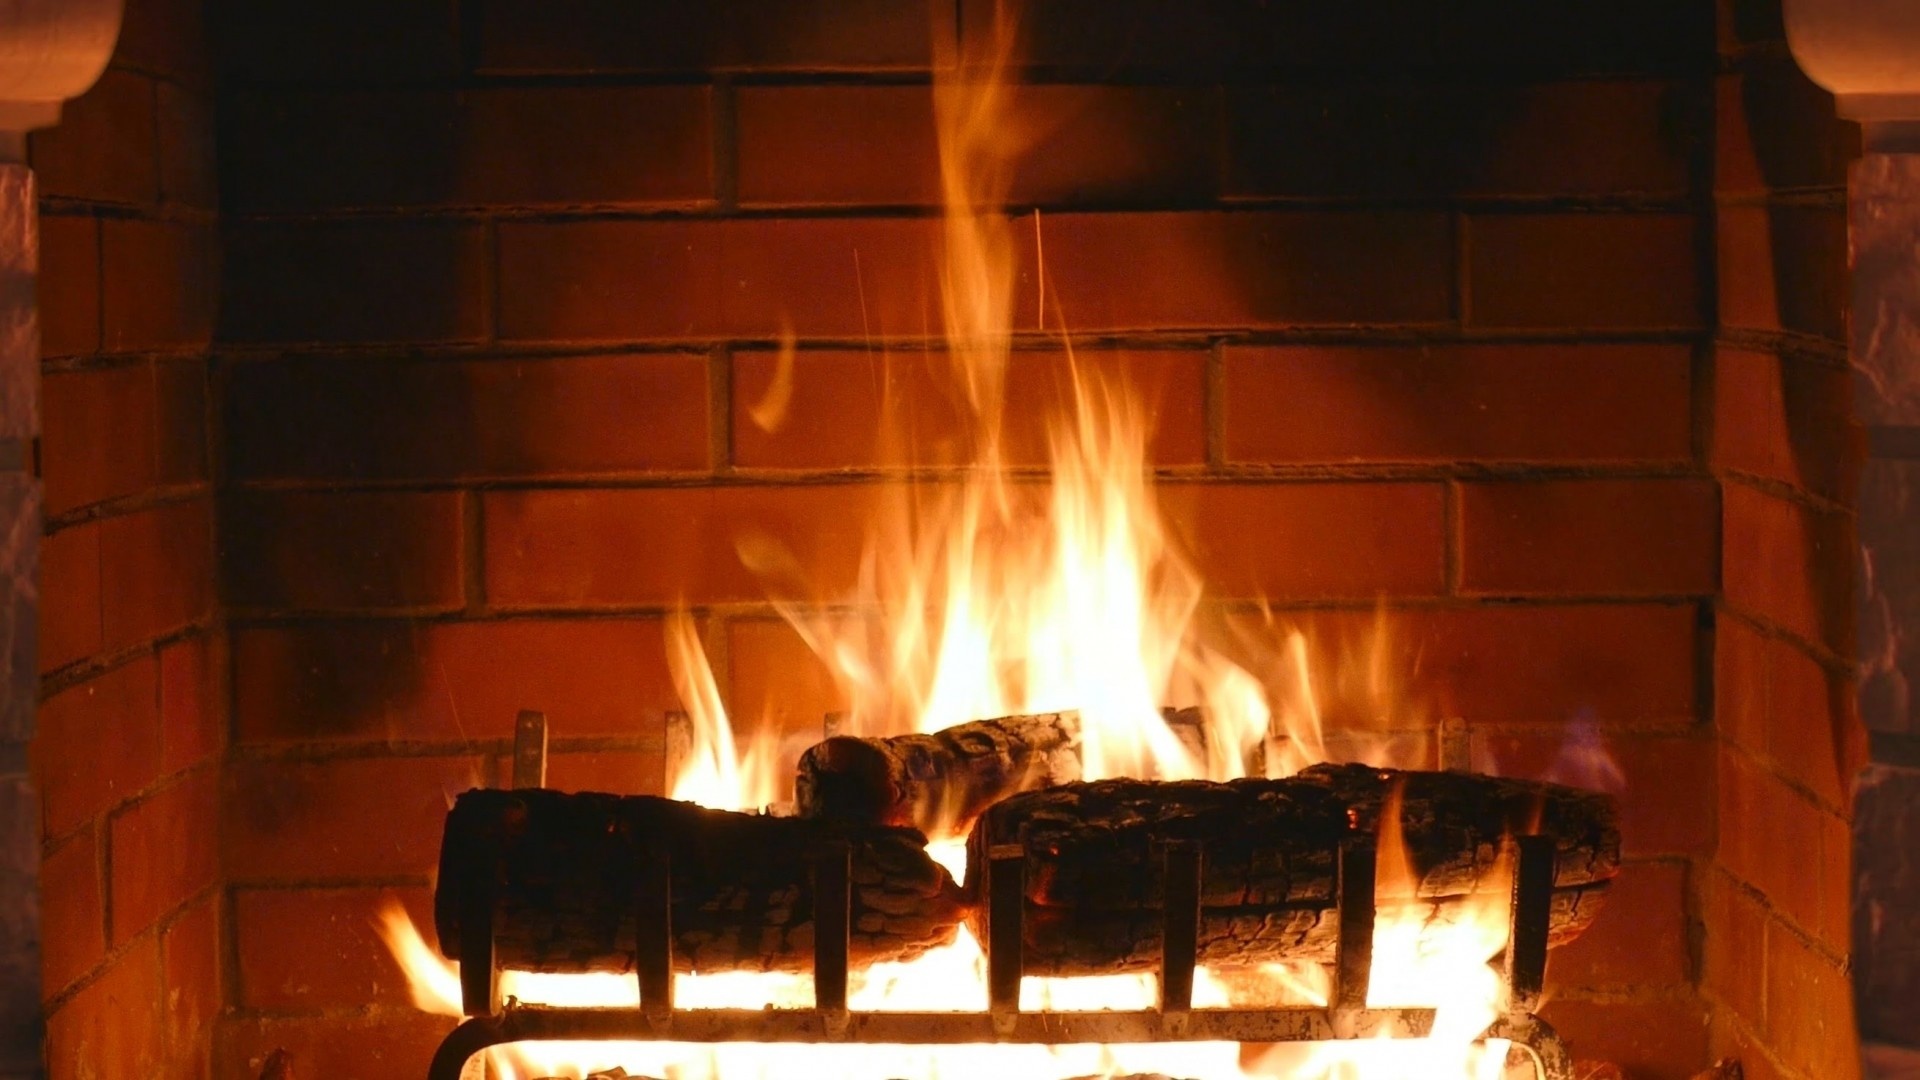 Fireplace: Crackling wood fire with brilliant flames, Combustion. 1920x1080 Full HD Wallpaper.